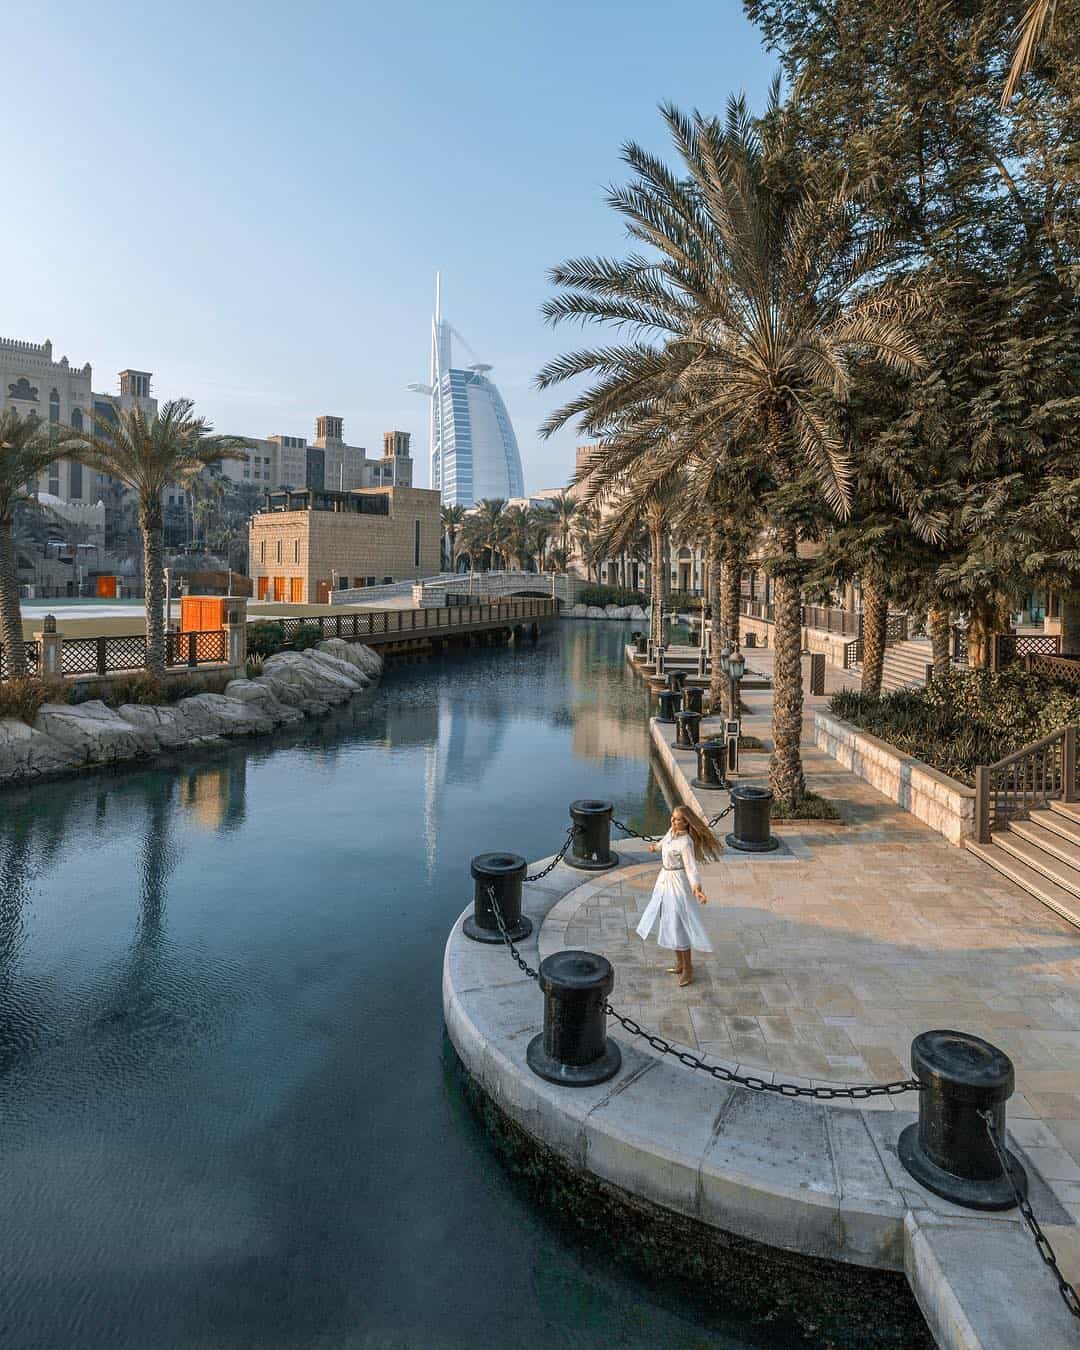 Experience The Unique Arabic Atmosphere By Booking Signature Photography Tours In Dubai. Join A Professional Photographer And Explore The Top Photo Locations In The UAE. Order Now And Capture The Memories!